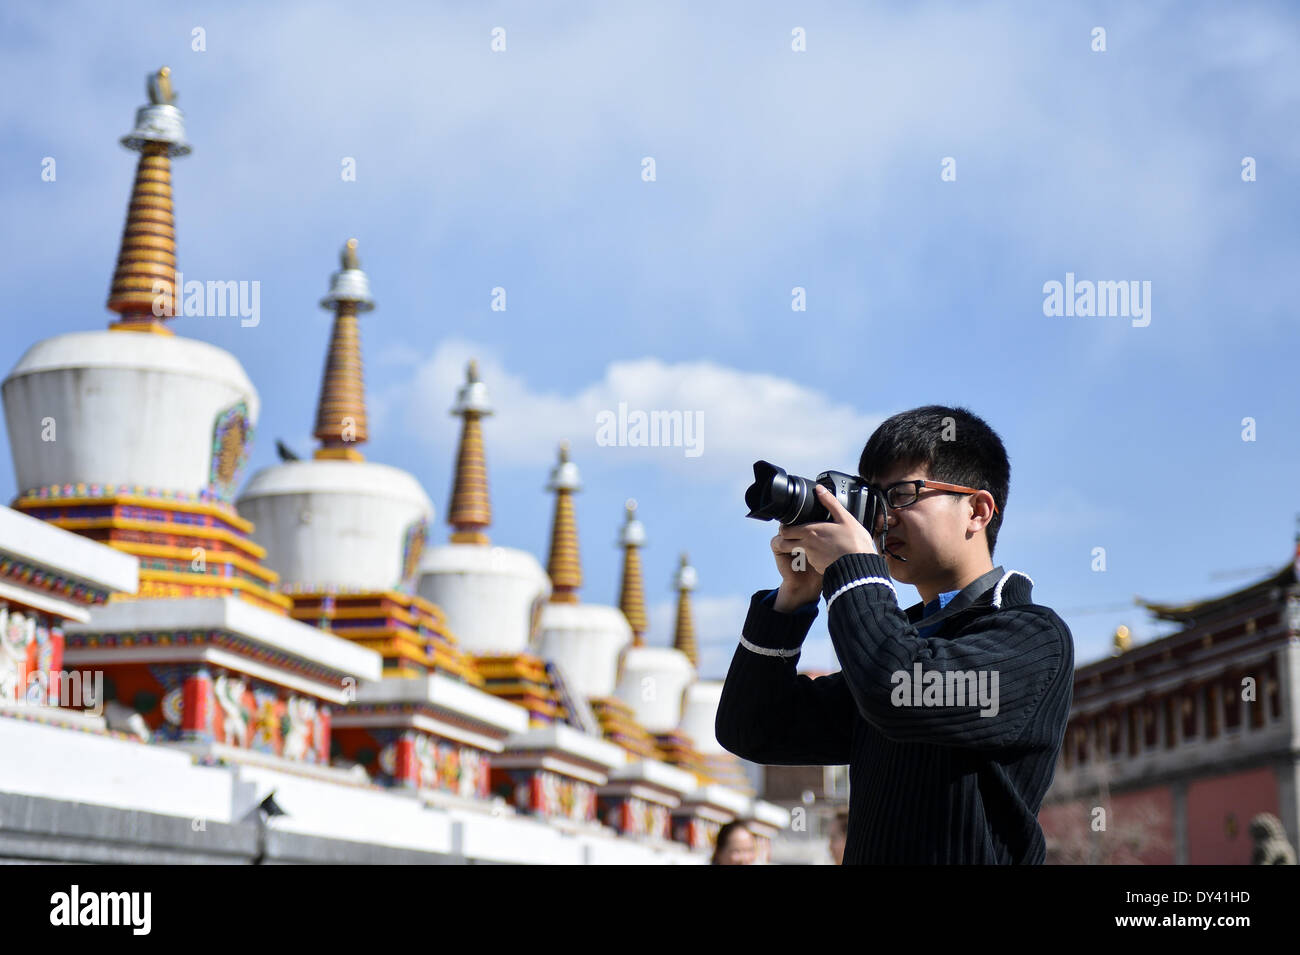 Huangzhong County, China's Qinghai Province. 6th Apr, 2014. A tourist taks photos in the Kumbum Monastery in Huangzhong County of Xining, capital of northwest China's Qinghai Province, April 6, 2014. The Kumbum Monastery is a main destination for Tibetan Buddhist pilgrims. It is also a major tourist attraction in Qinghai, which features splendid religious murals, Thangka appliques and butter sculptures. © Wu Gang/Xinhua/Alamy Live News Stock Photo